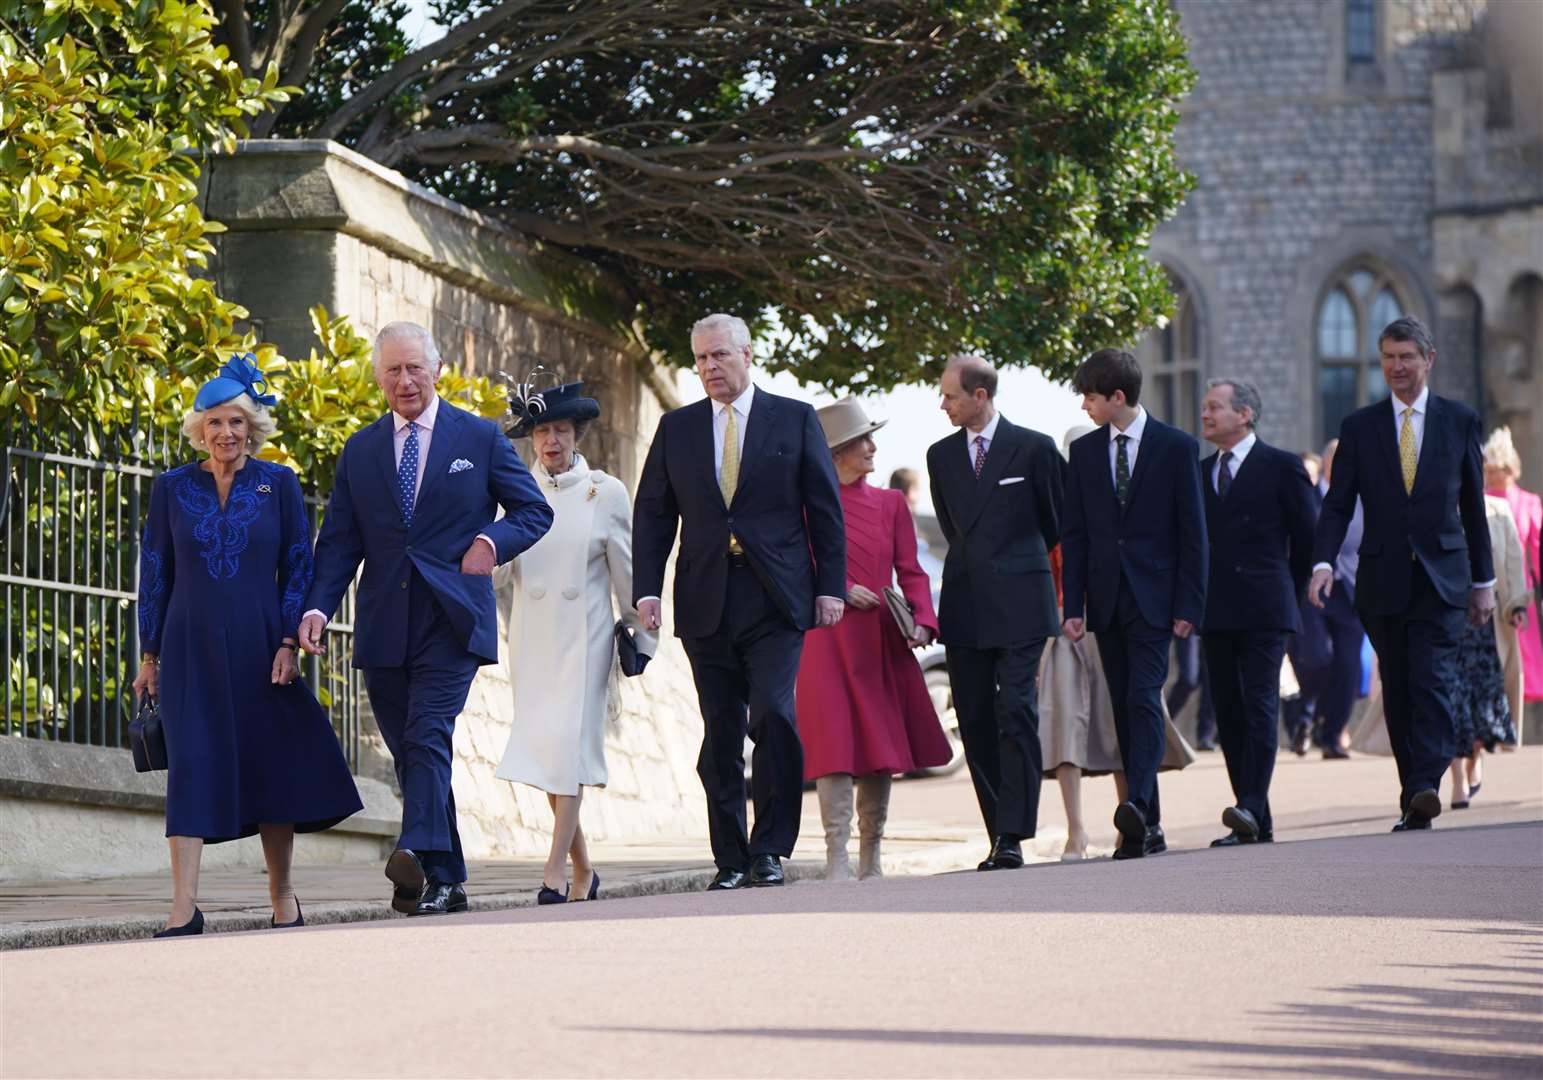 The Easter Mattins service usually sees a large turnout of royals but numbers will be reduced this year (Yui Mok/PA)